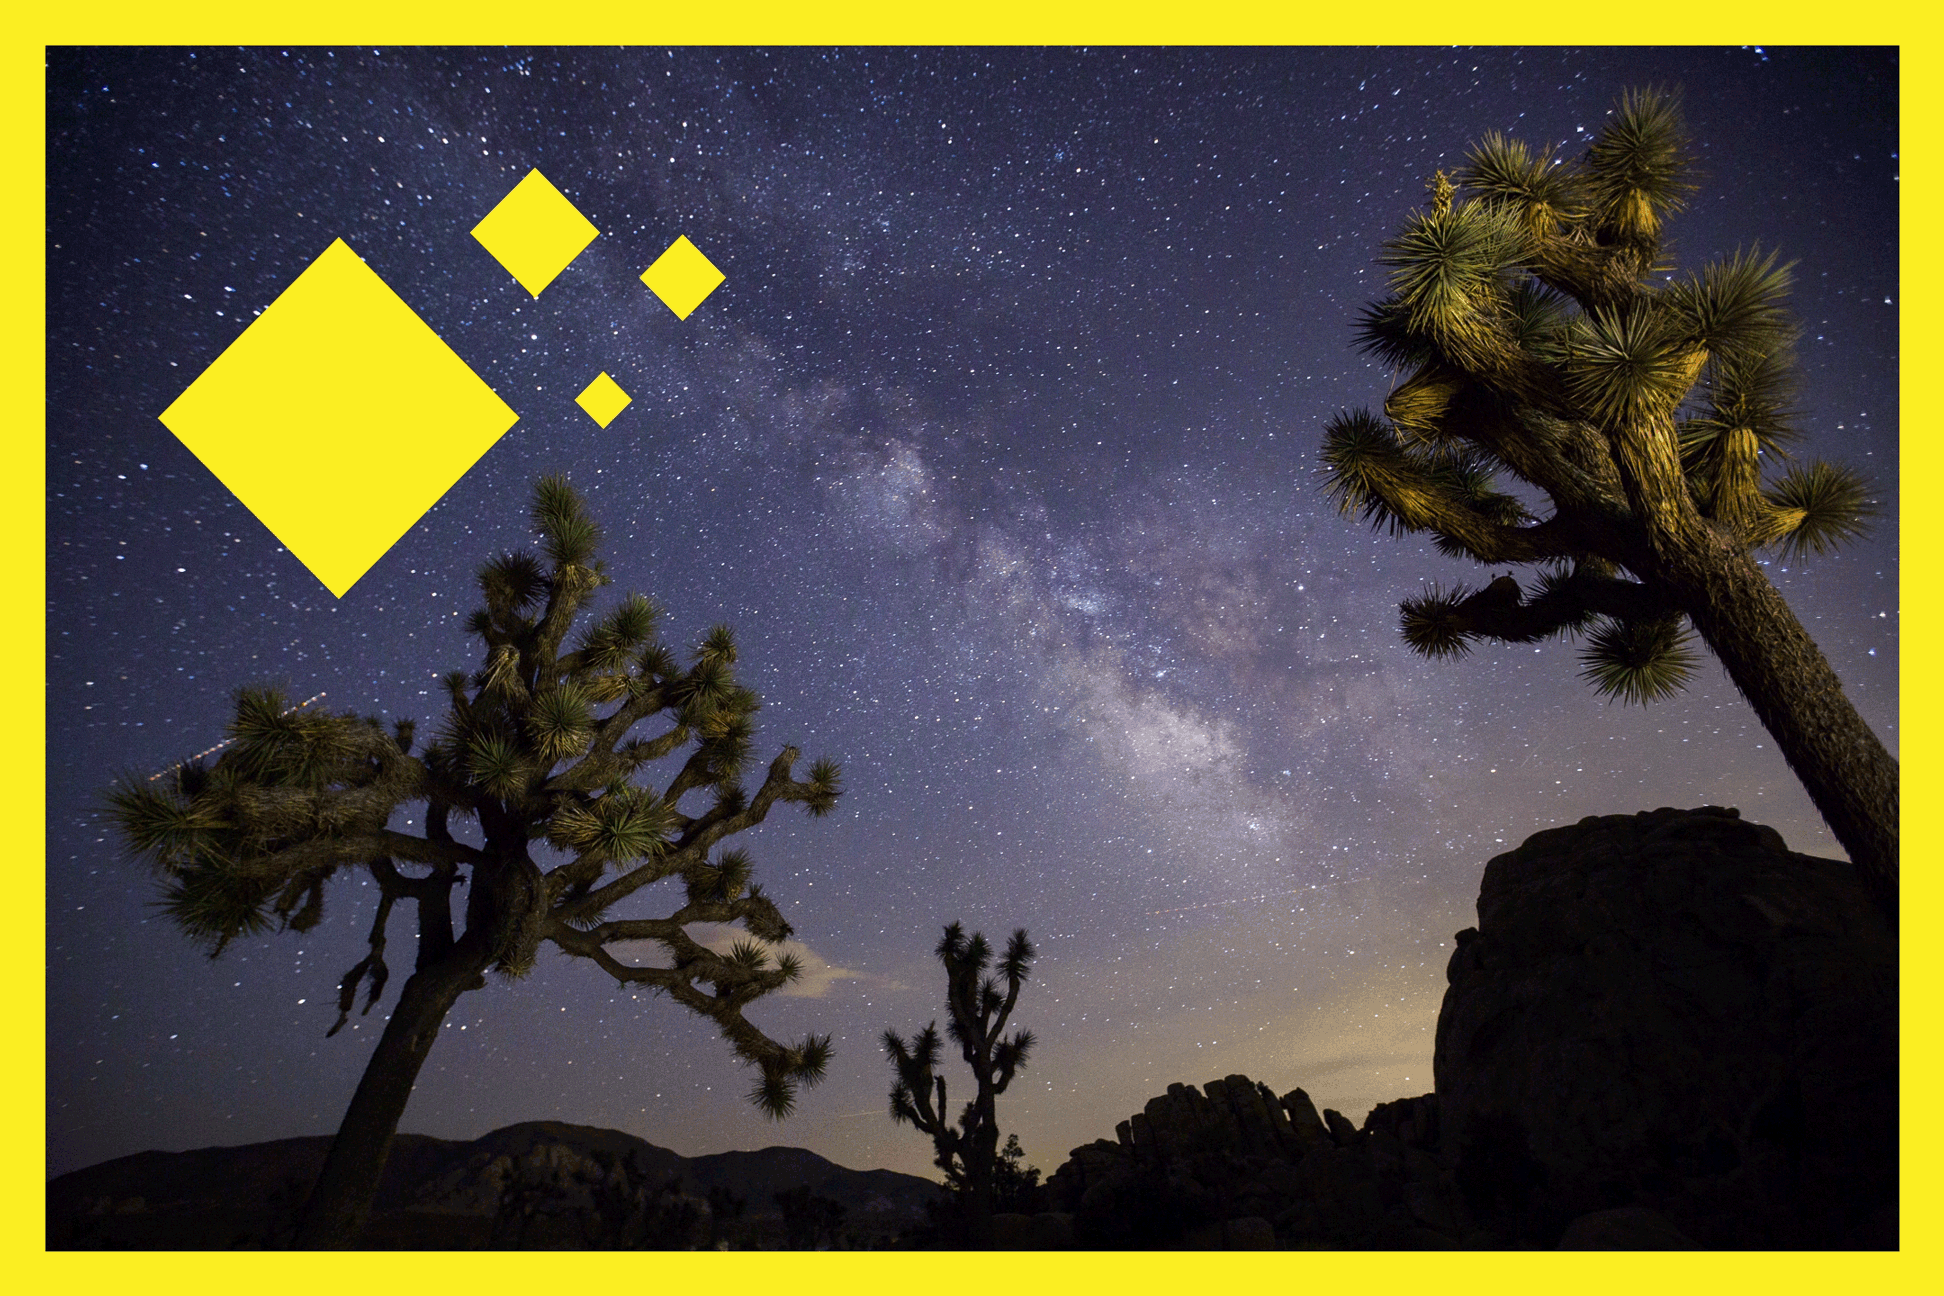 A view of the Milky Way arching over Joshua Trees and rocks at a park campground.